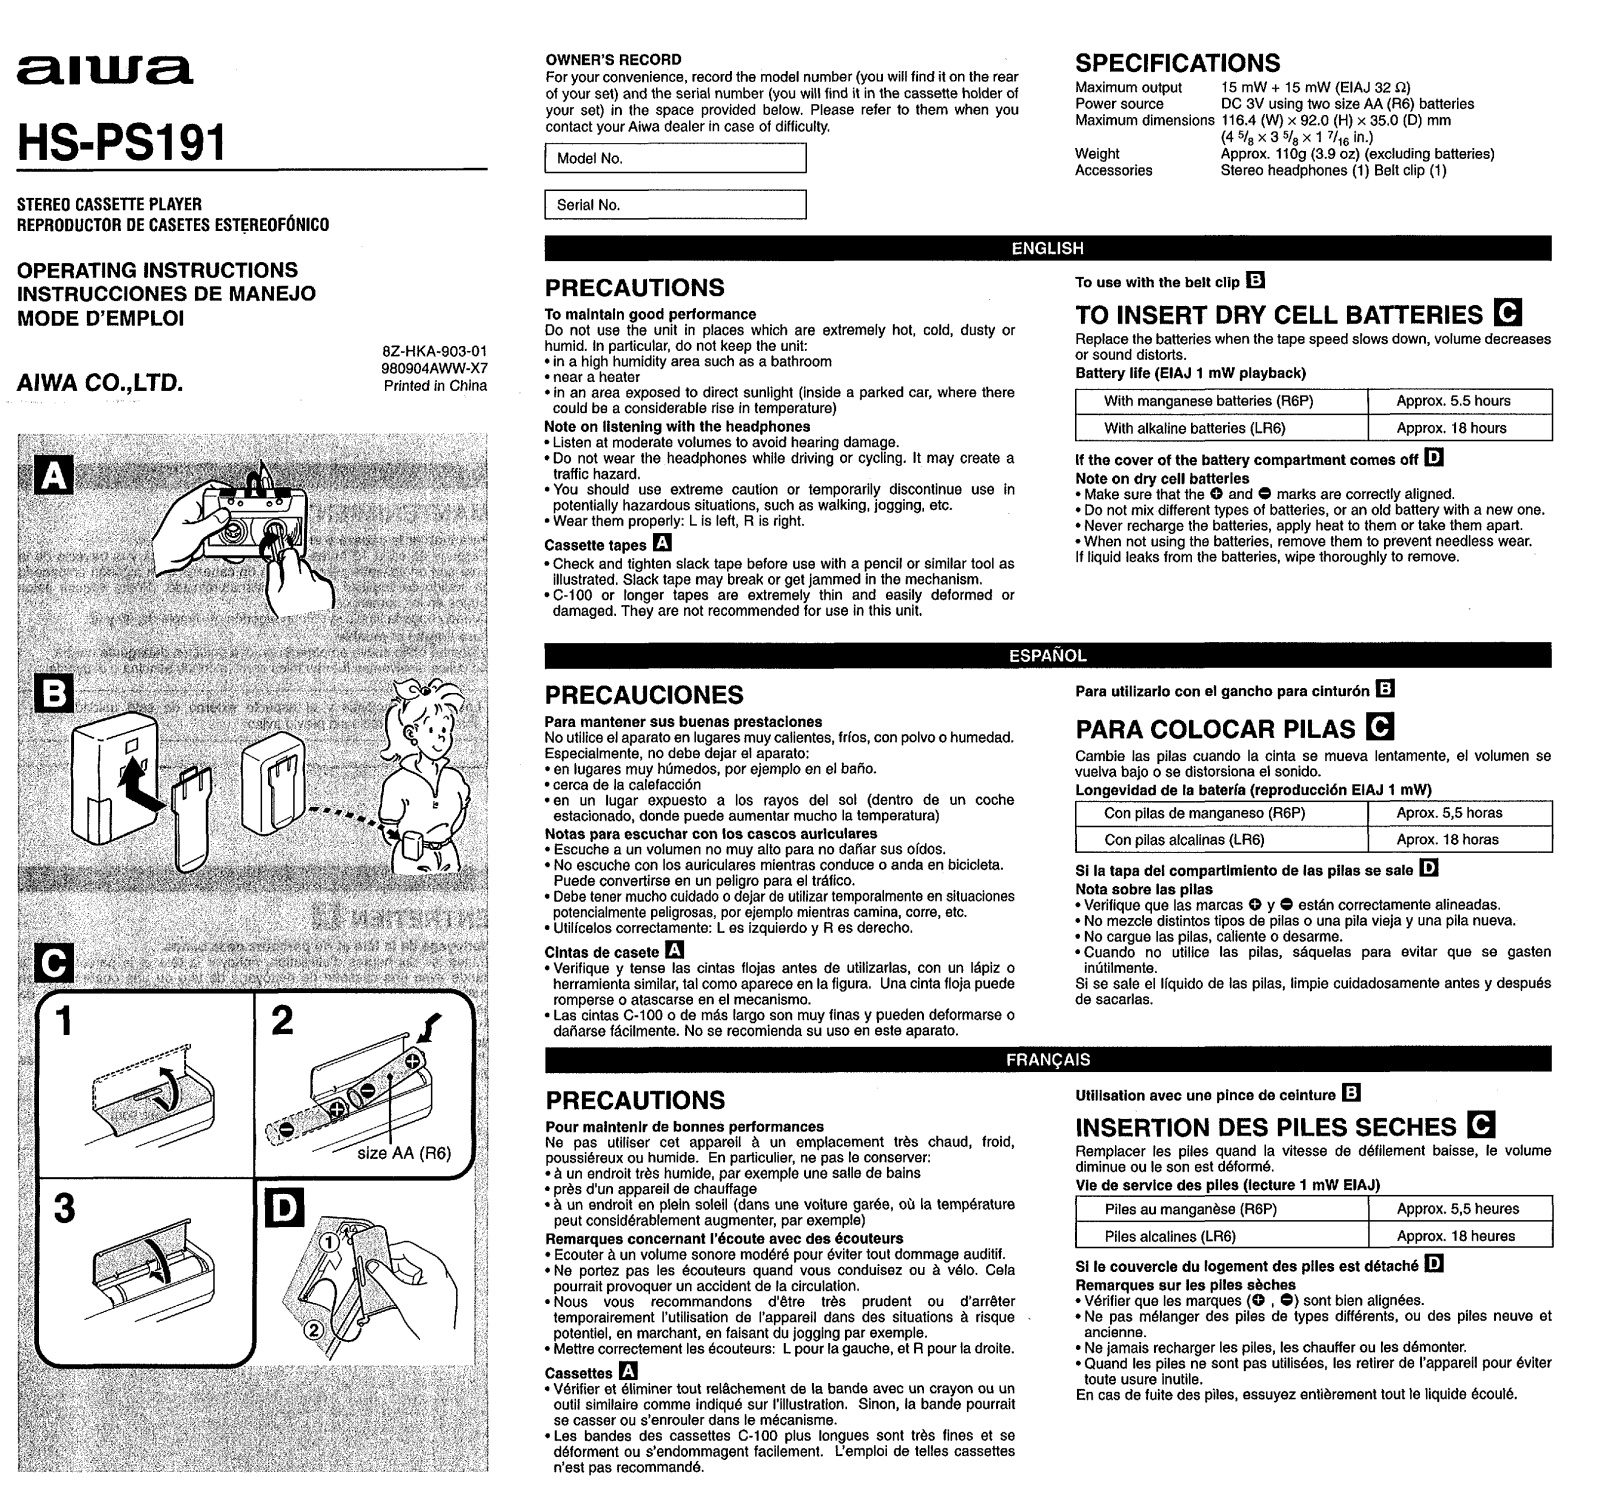 Sony HSPS191 OPERATING MANUAL